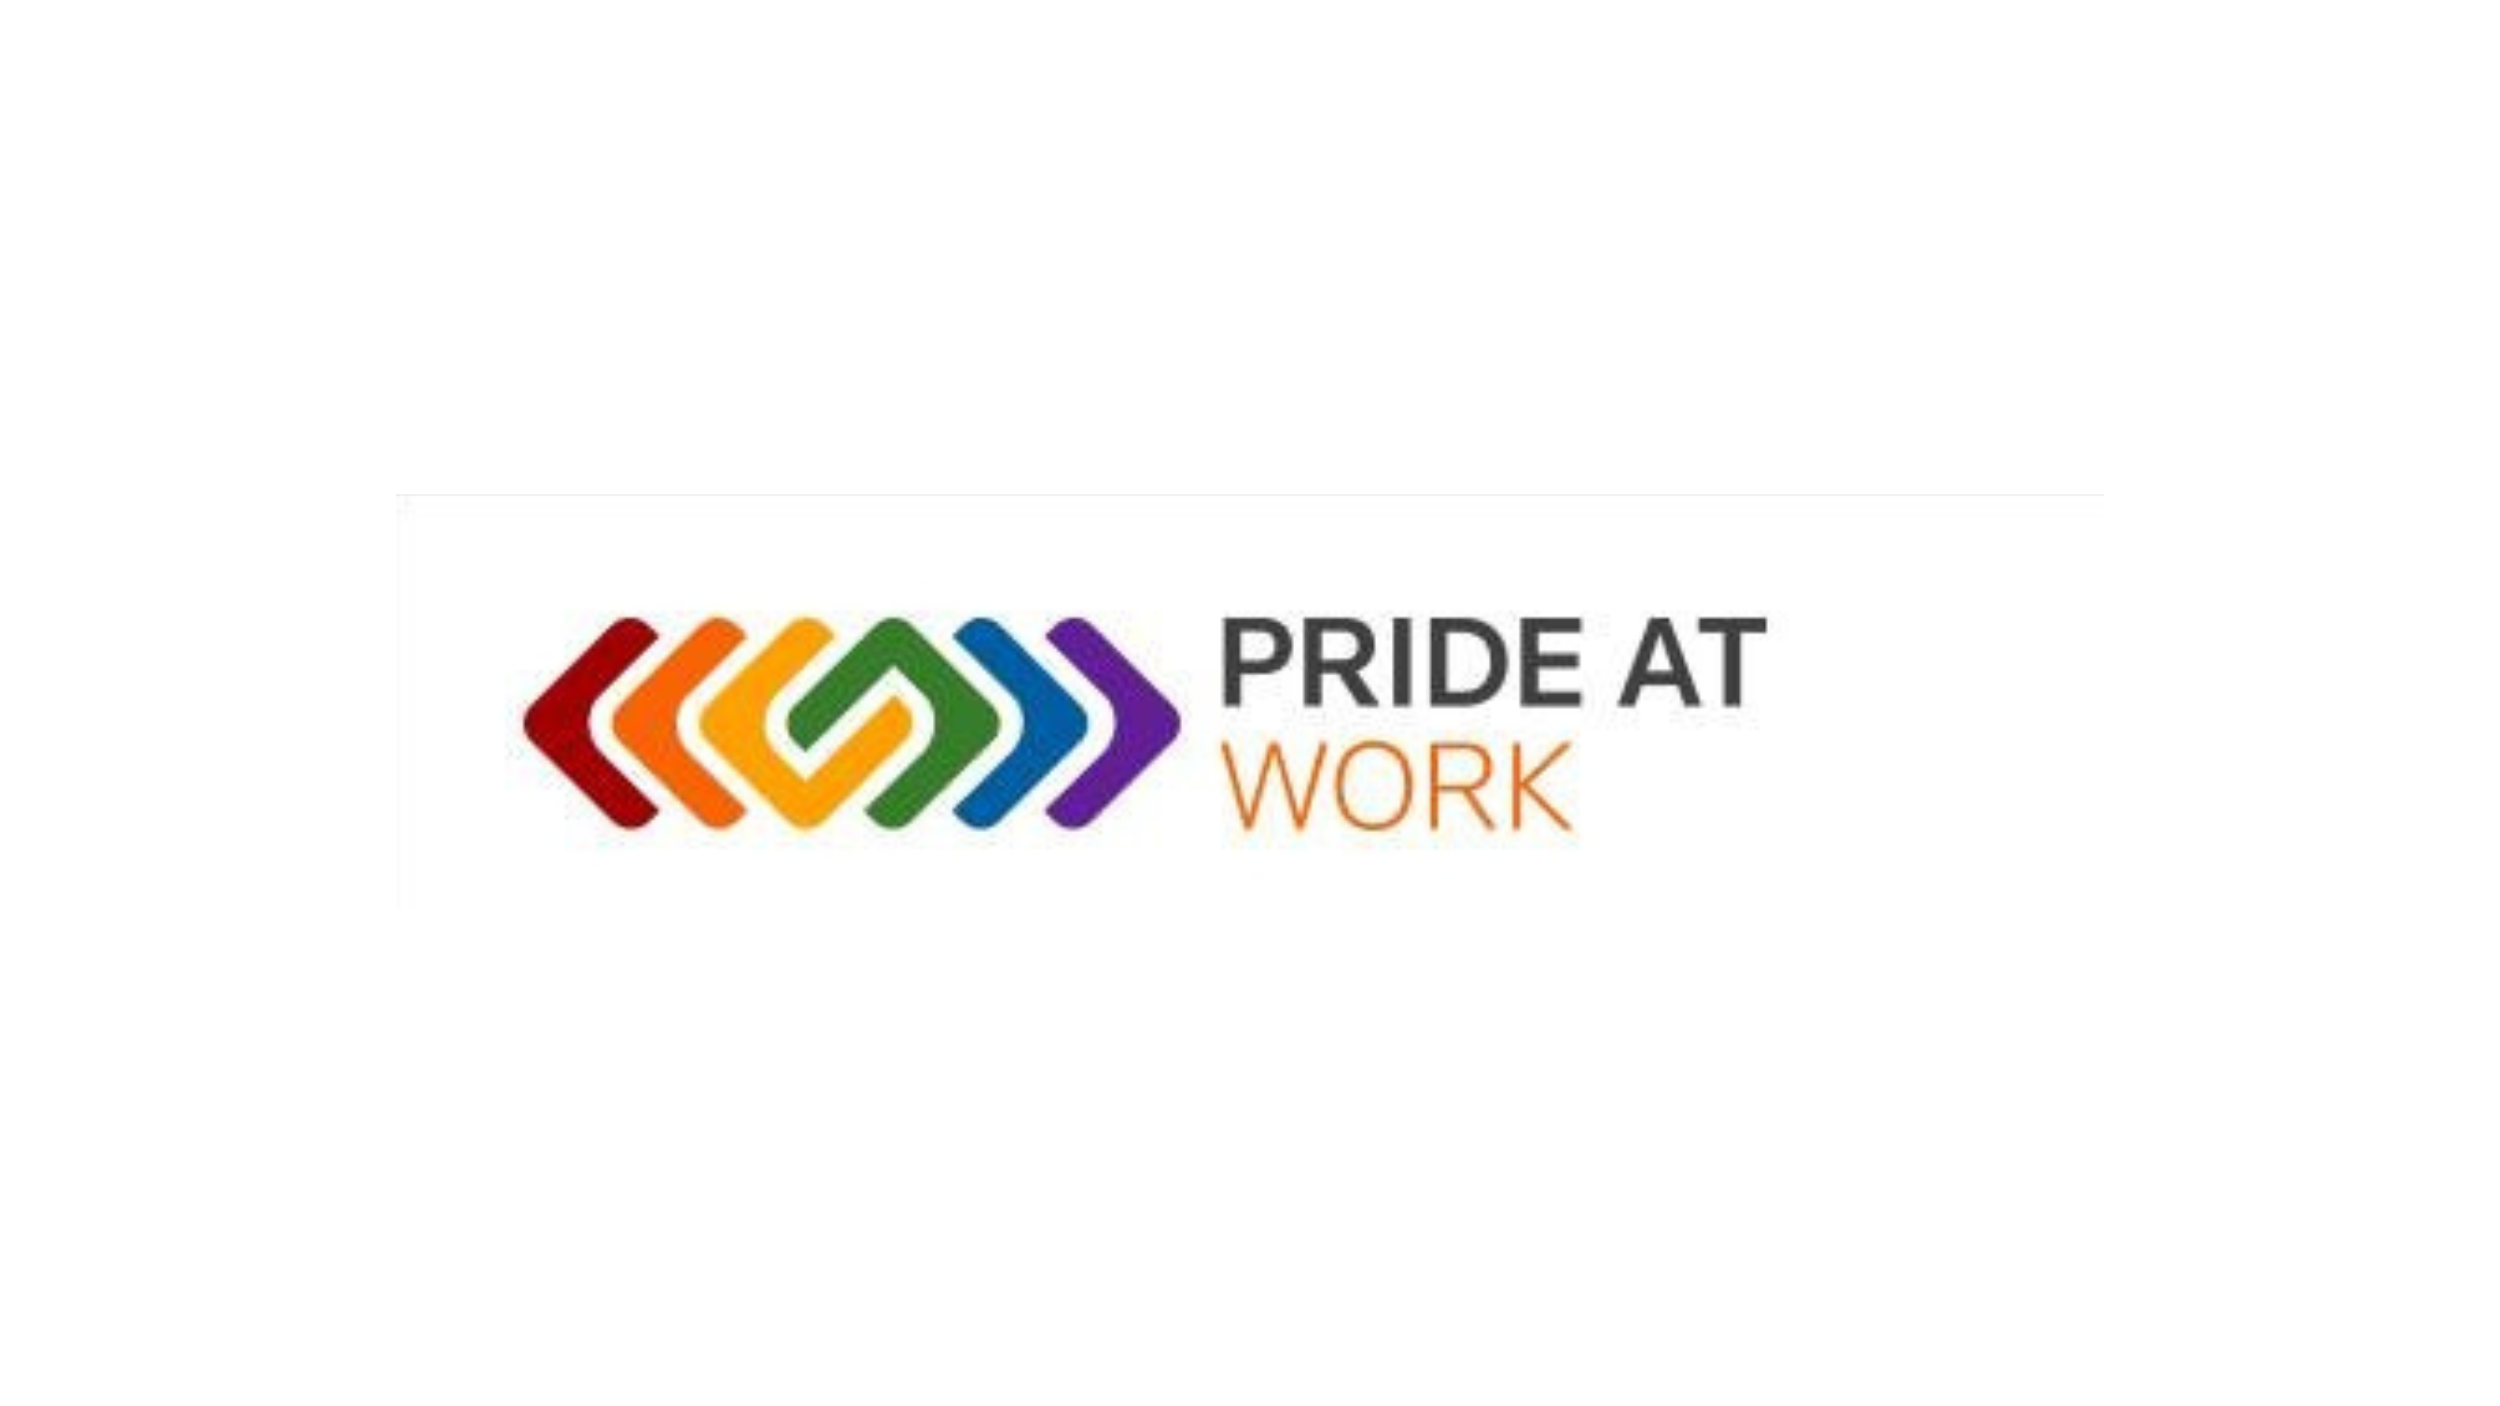 Thomson Reuters Pride at Work business resource group logo